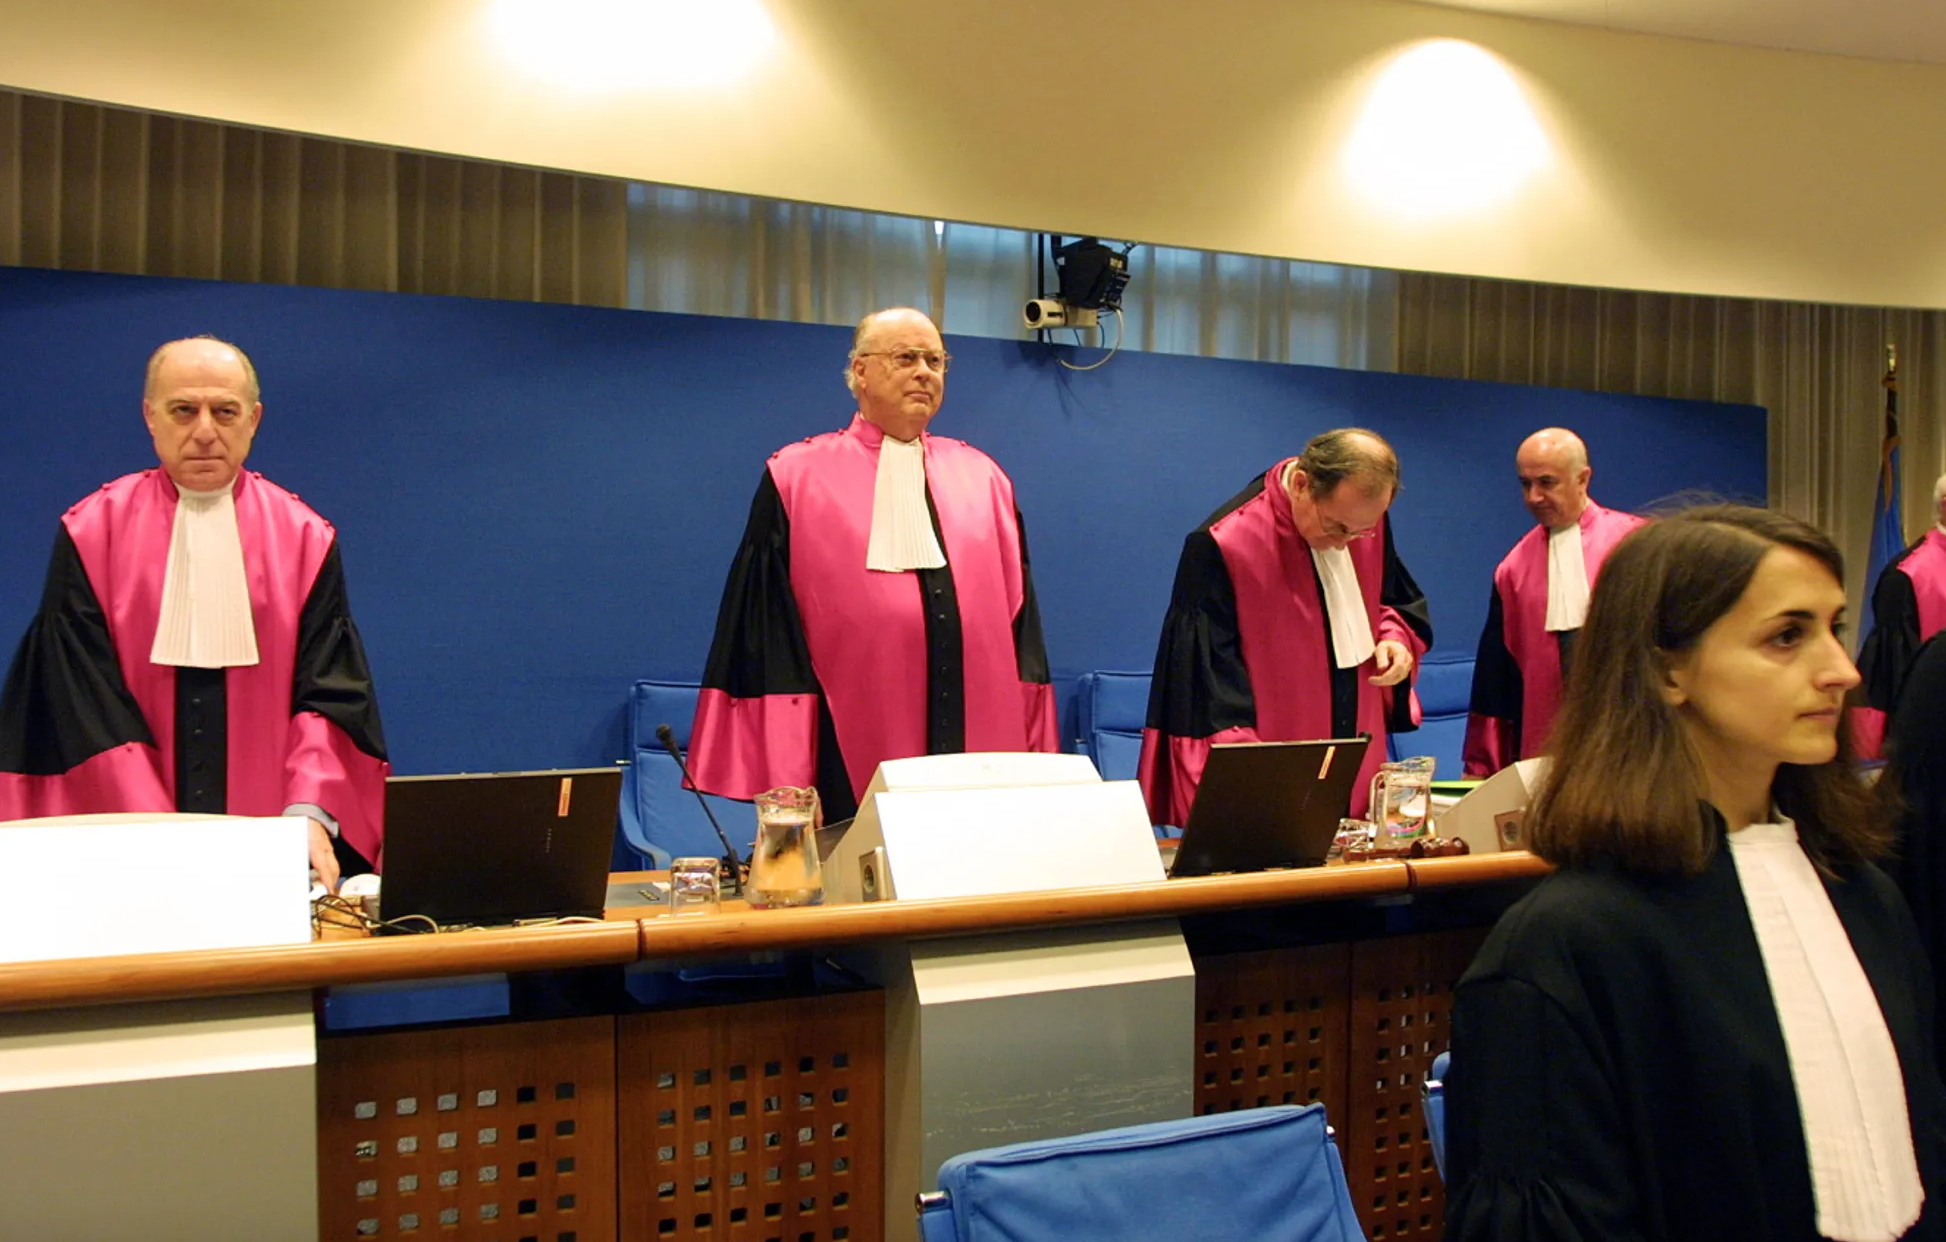 International Criminal Court judges in the Appeals Chamber. Photo by Michel Porro/Getty Images.